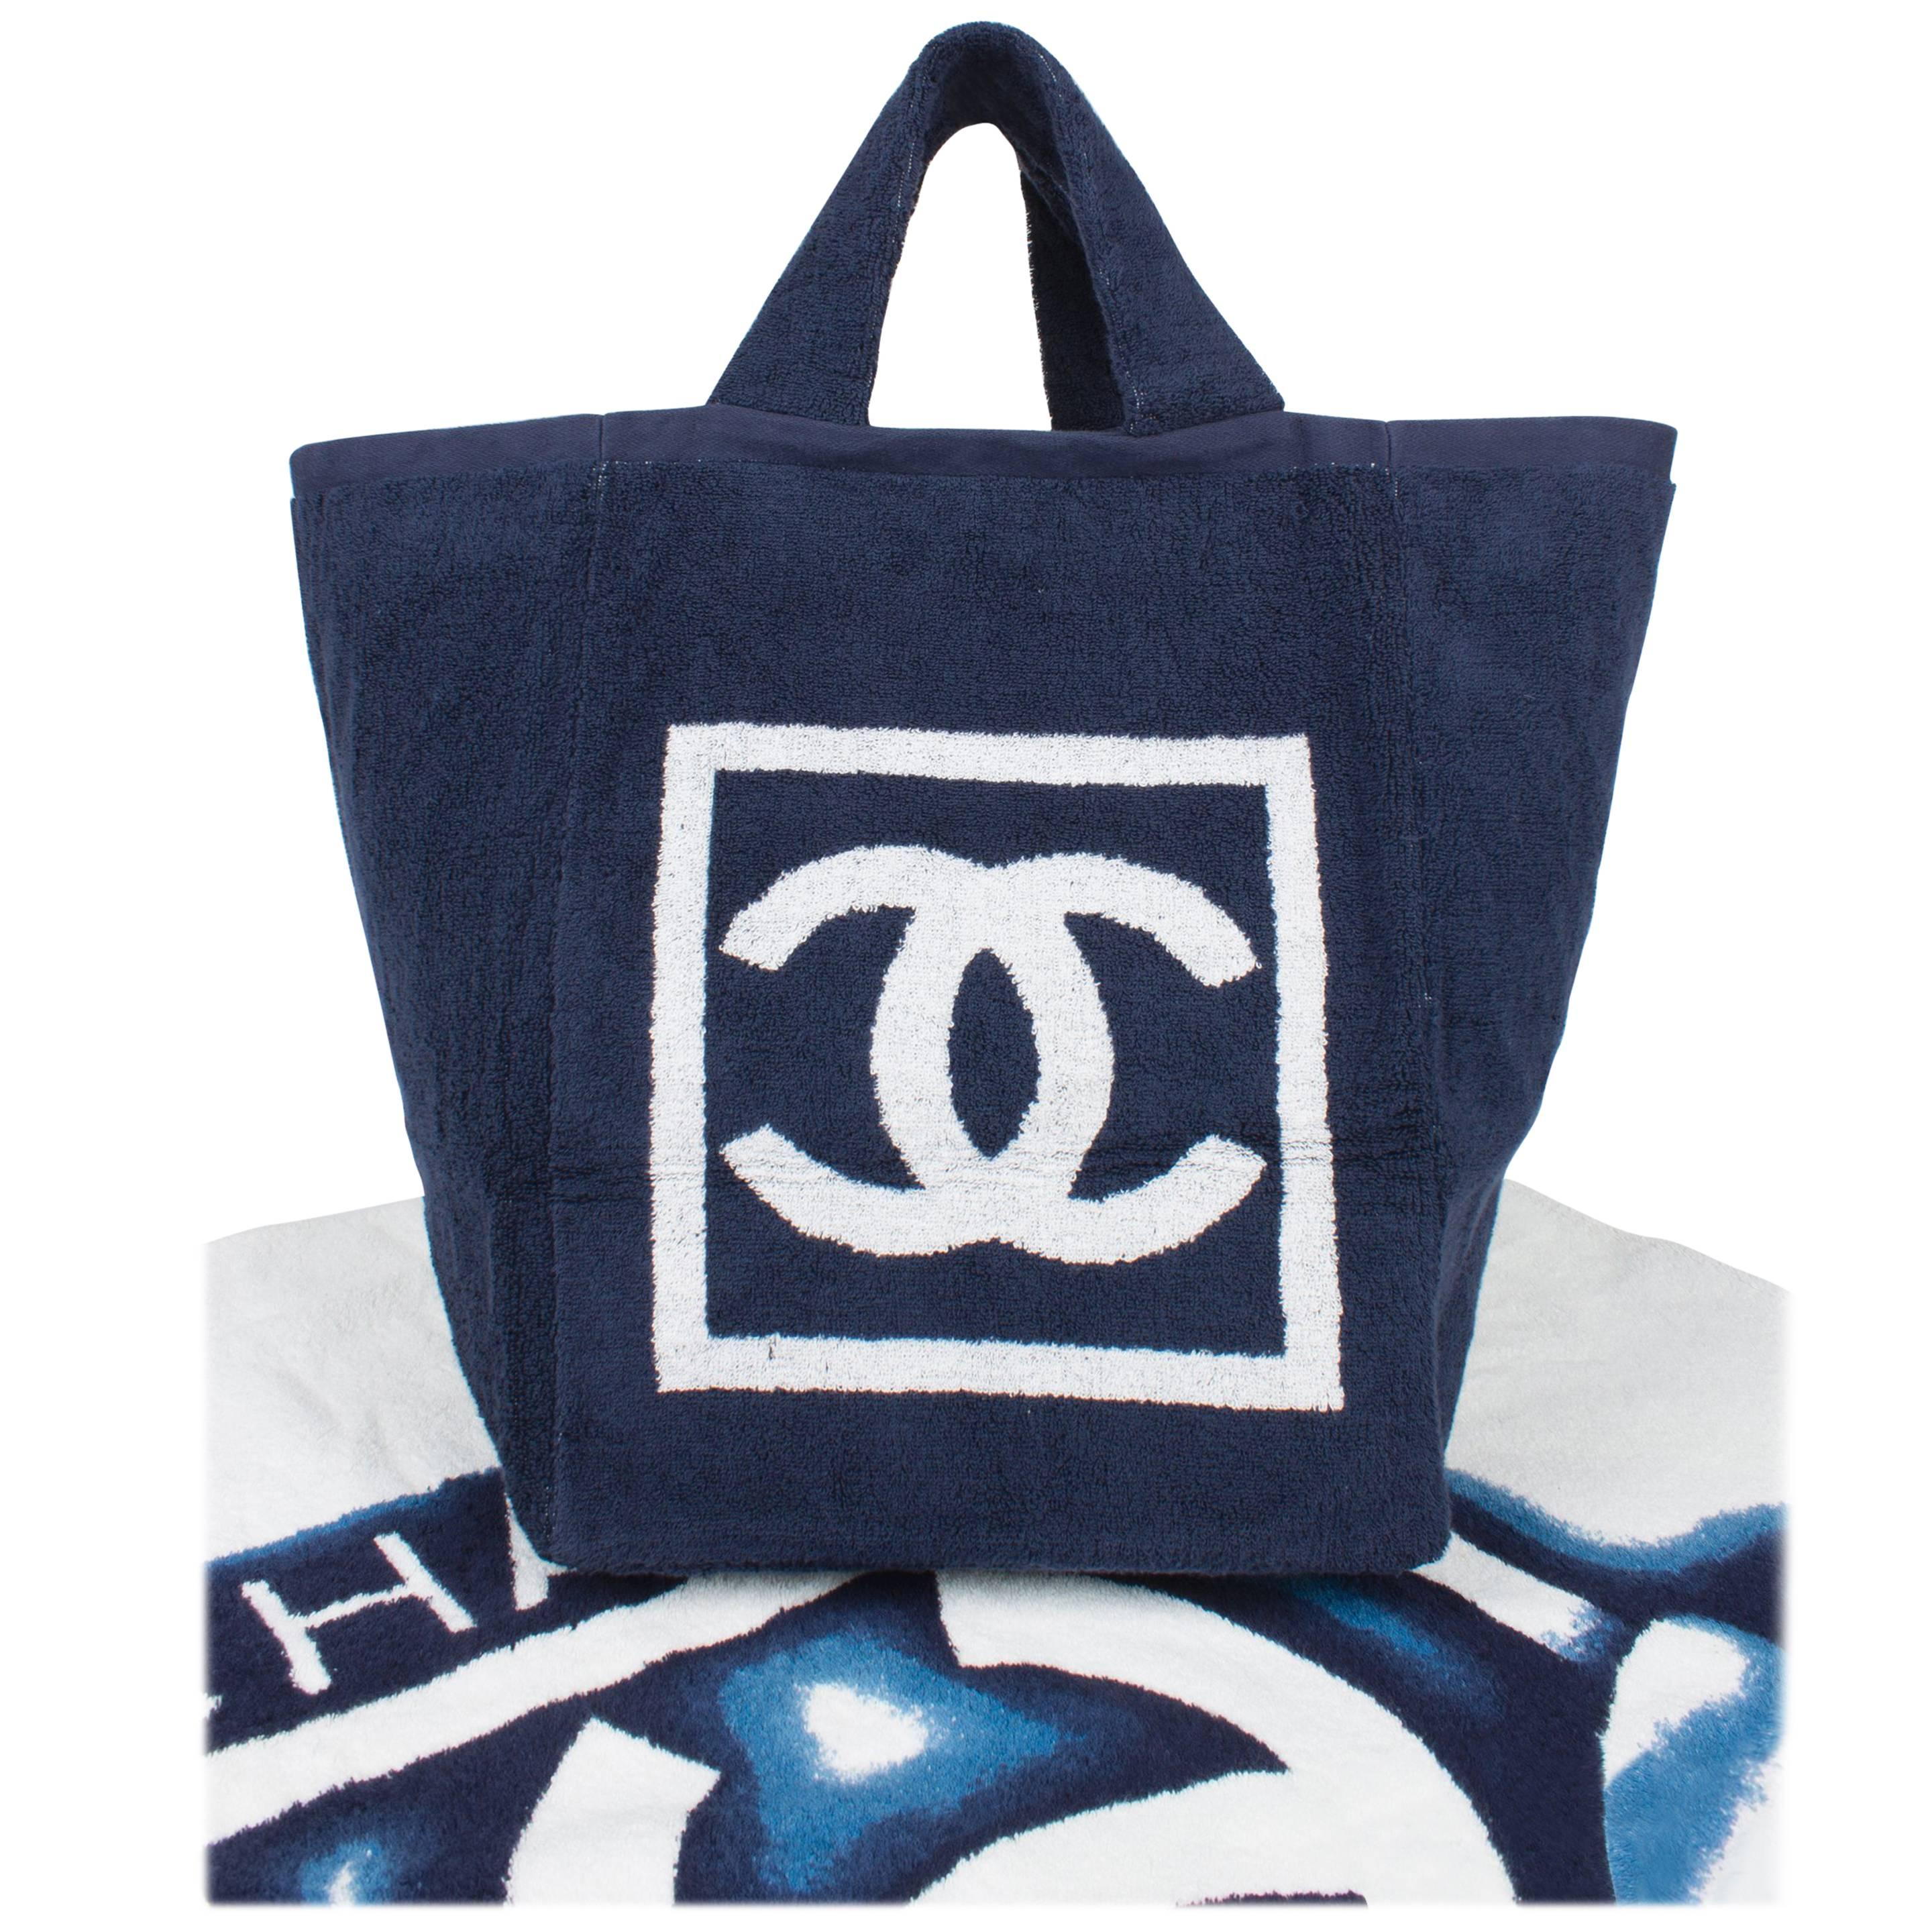 Chanel Beach Bag and Towel - navy blue/white terry cloth